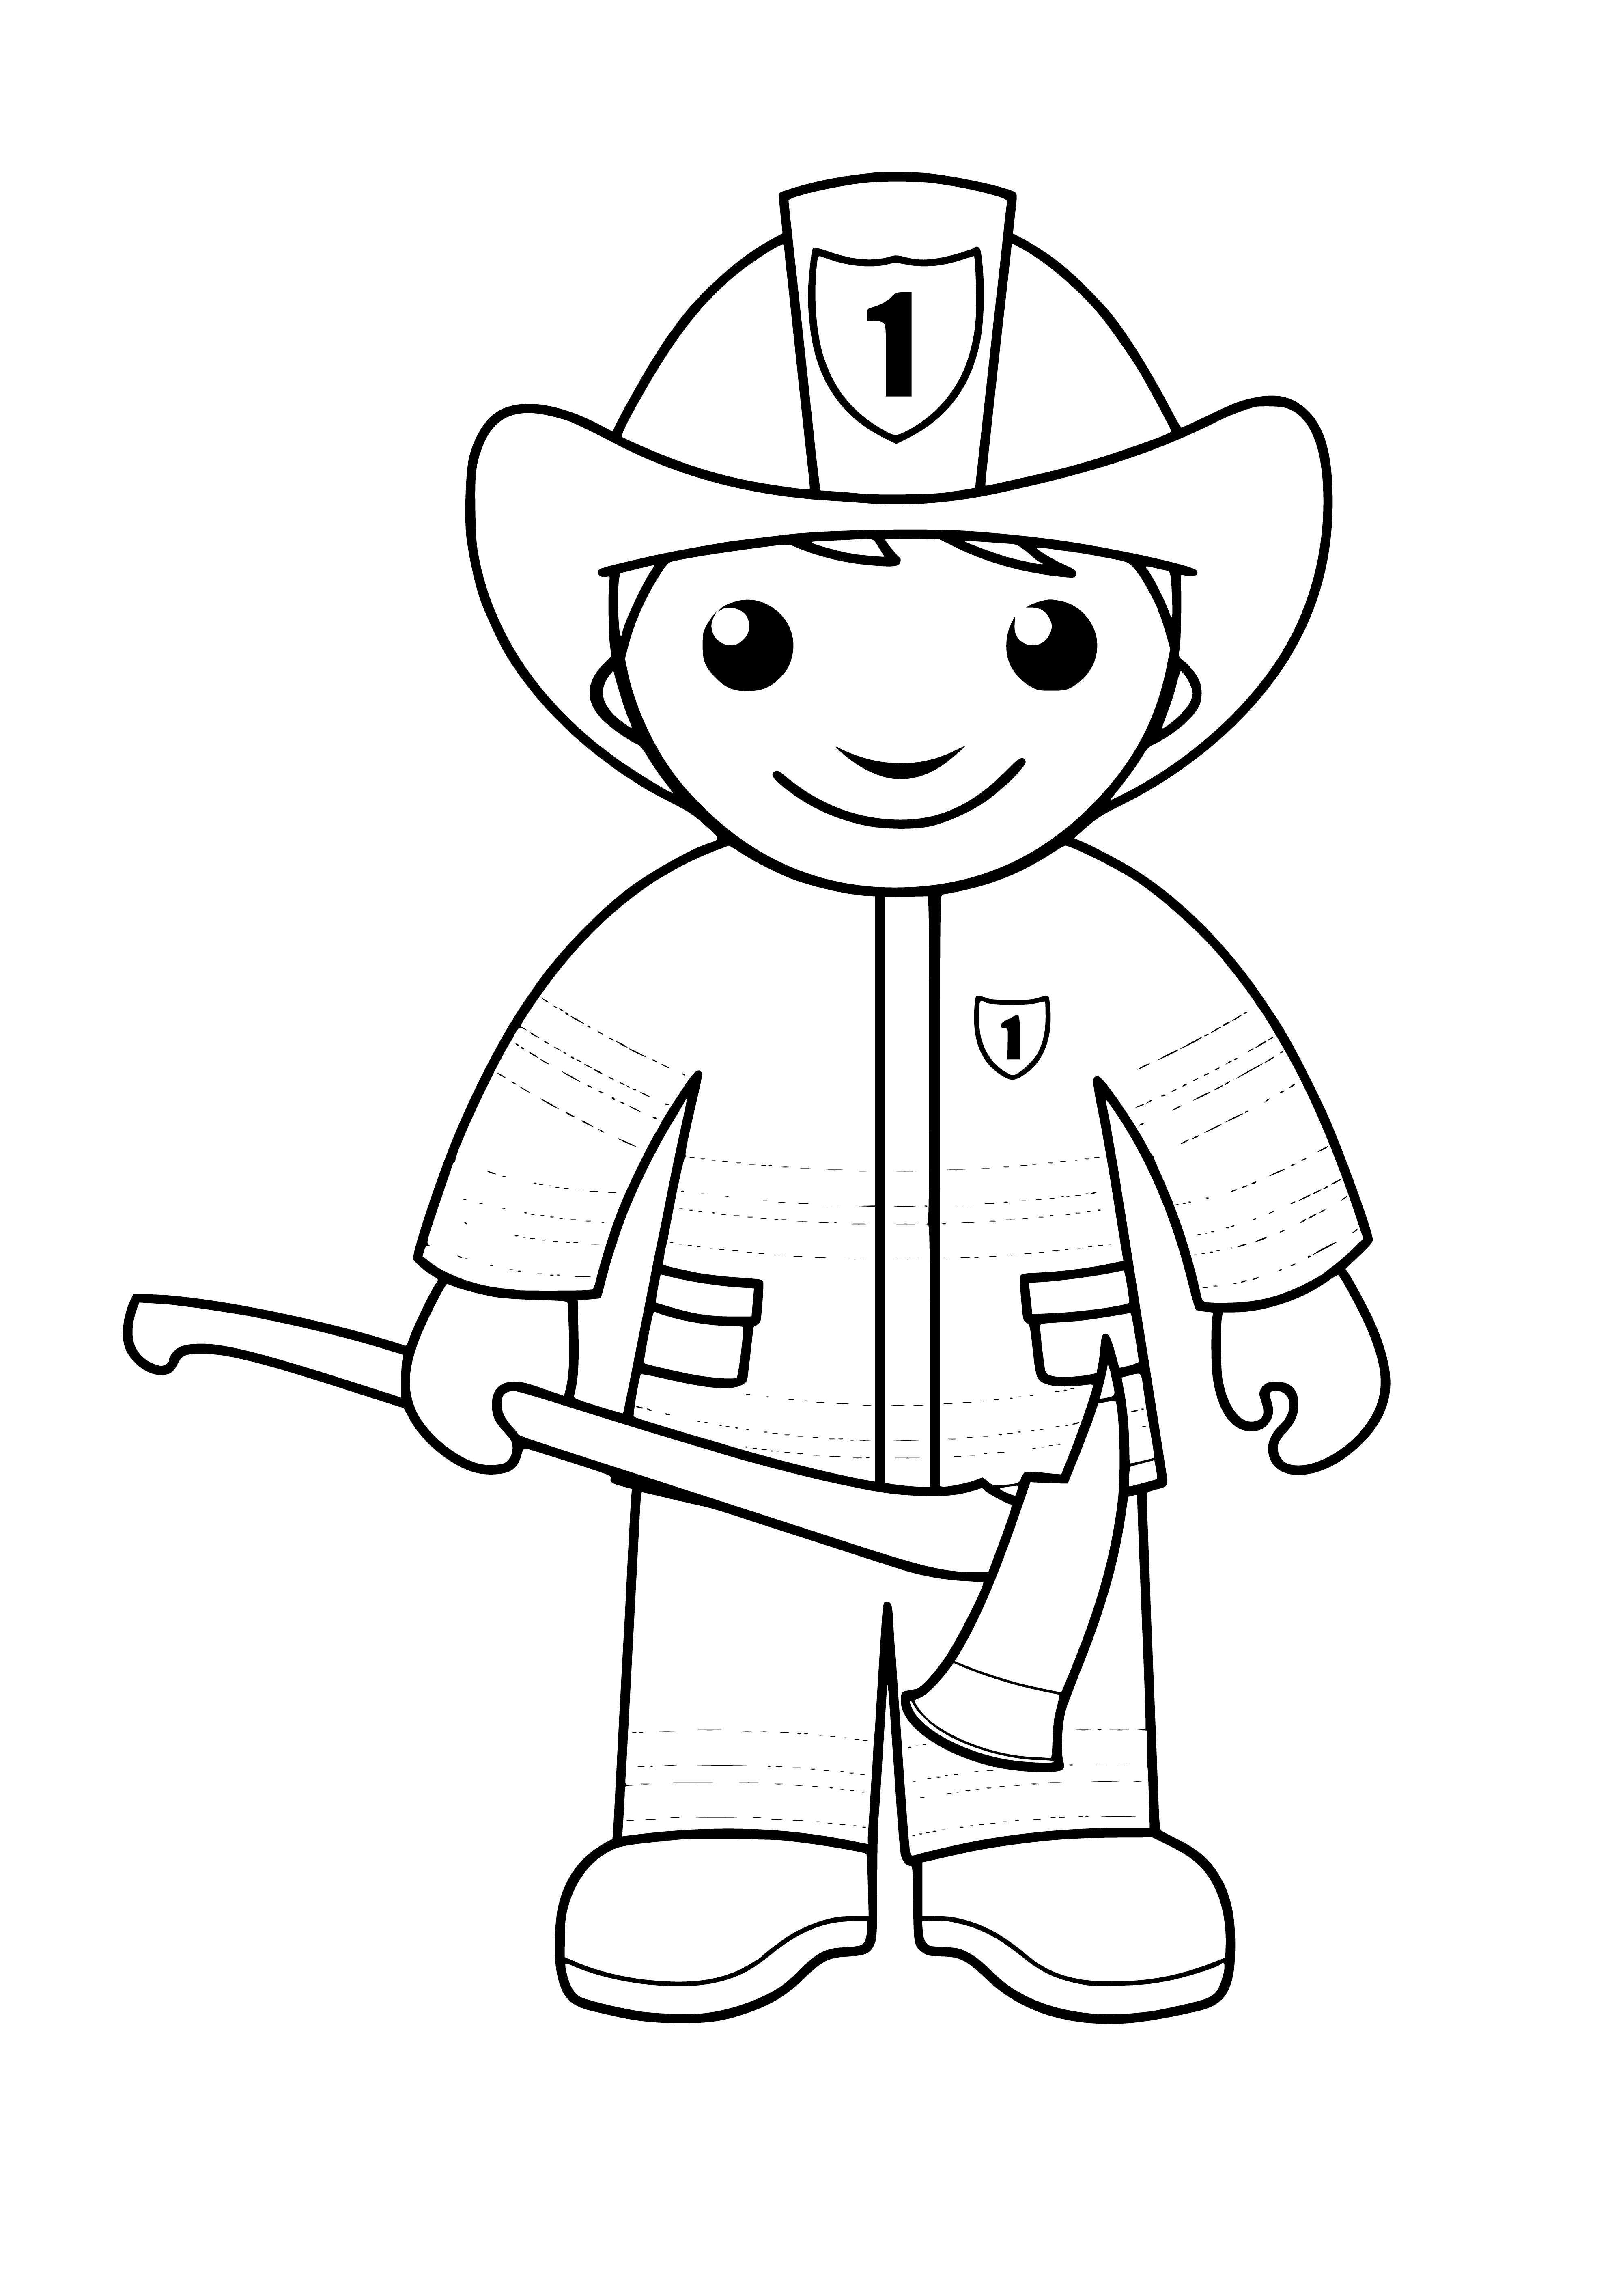 coloring page: Fireman in red suit & helmet stands in front of red fire truck w/ an axe in hand.